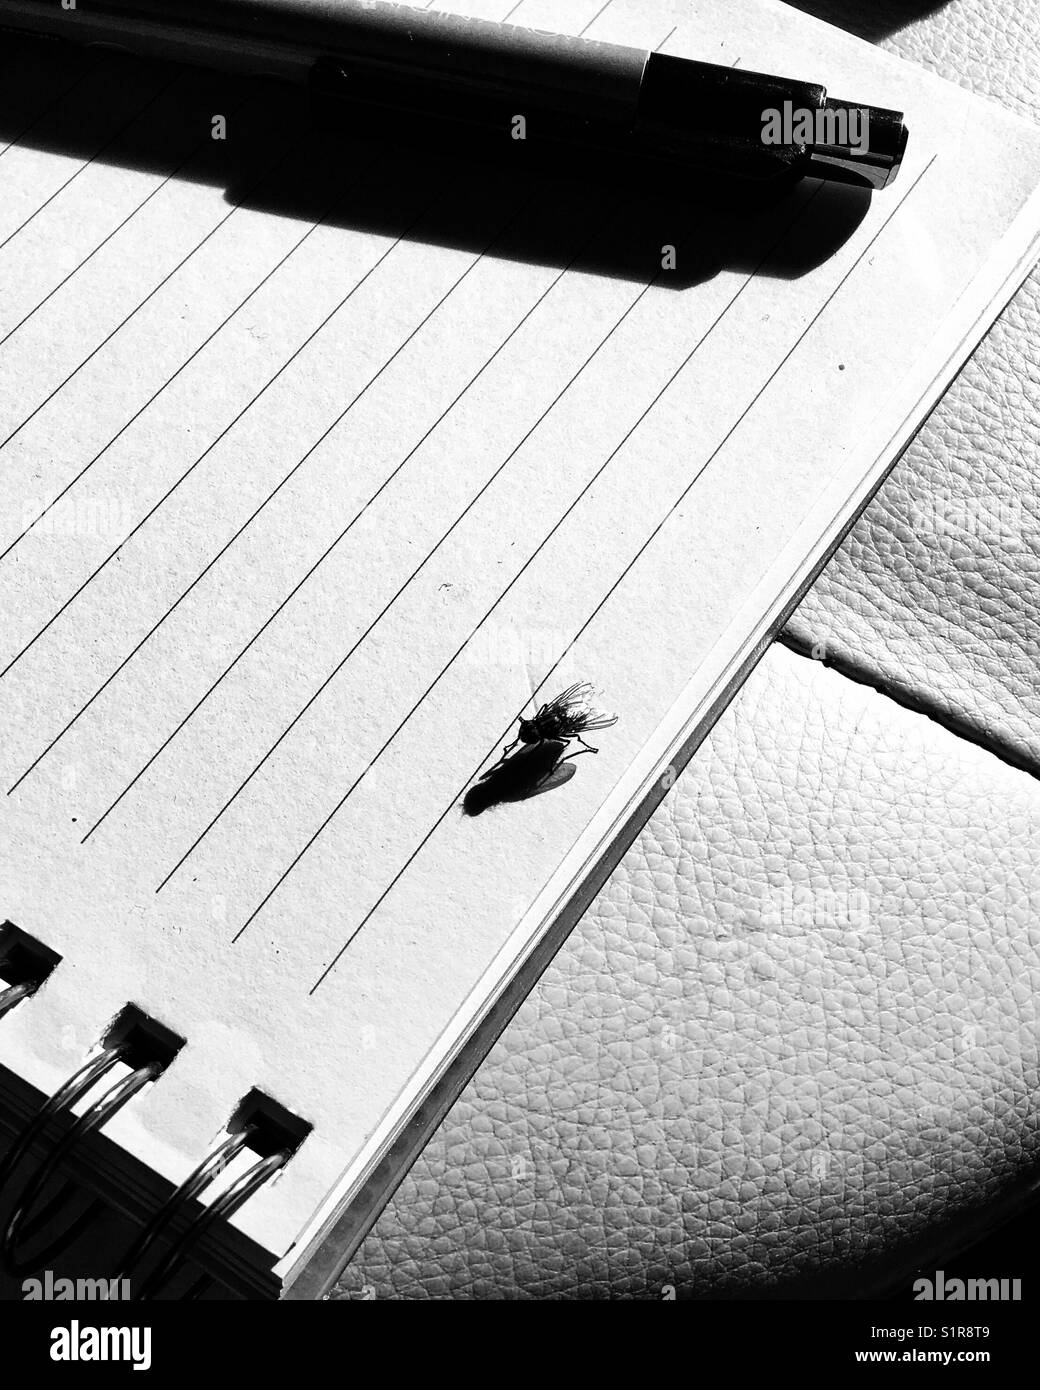 Fly and pen on lined page of a note pad. In black and white. Stock Photo